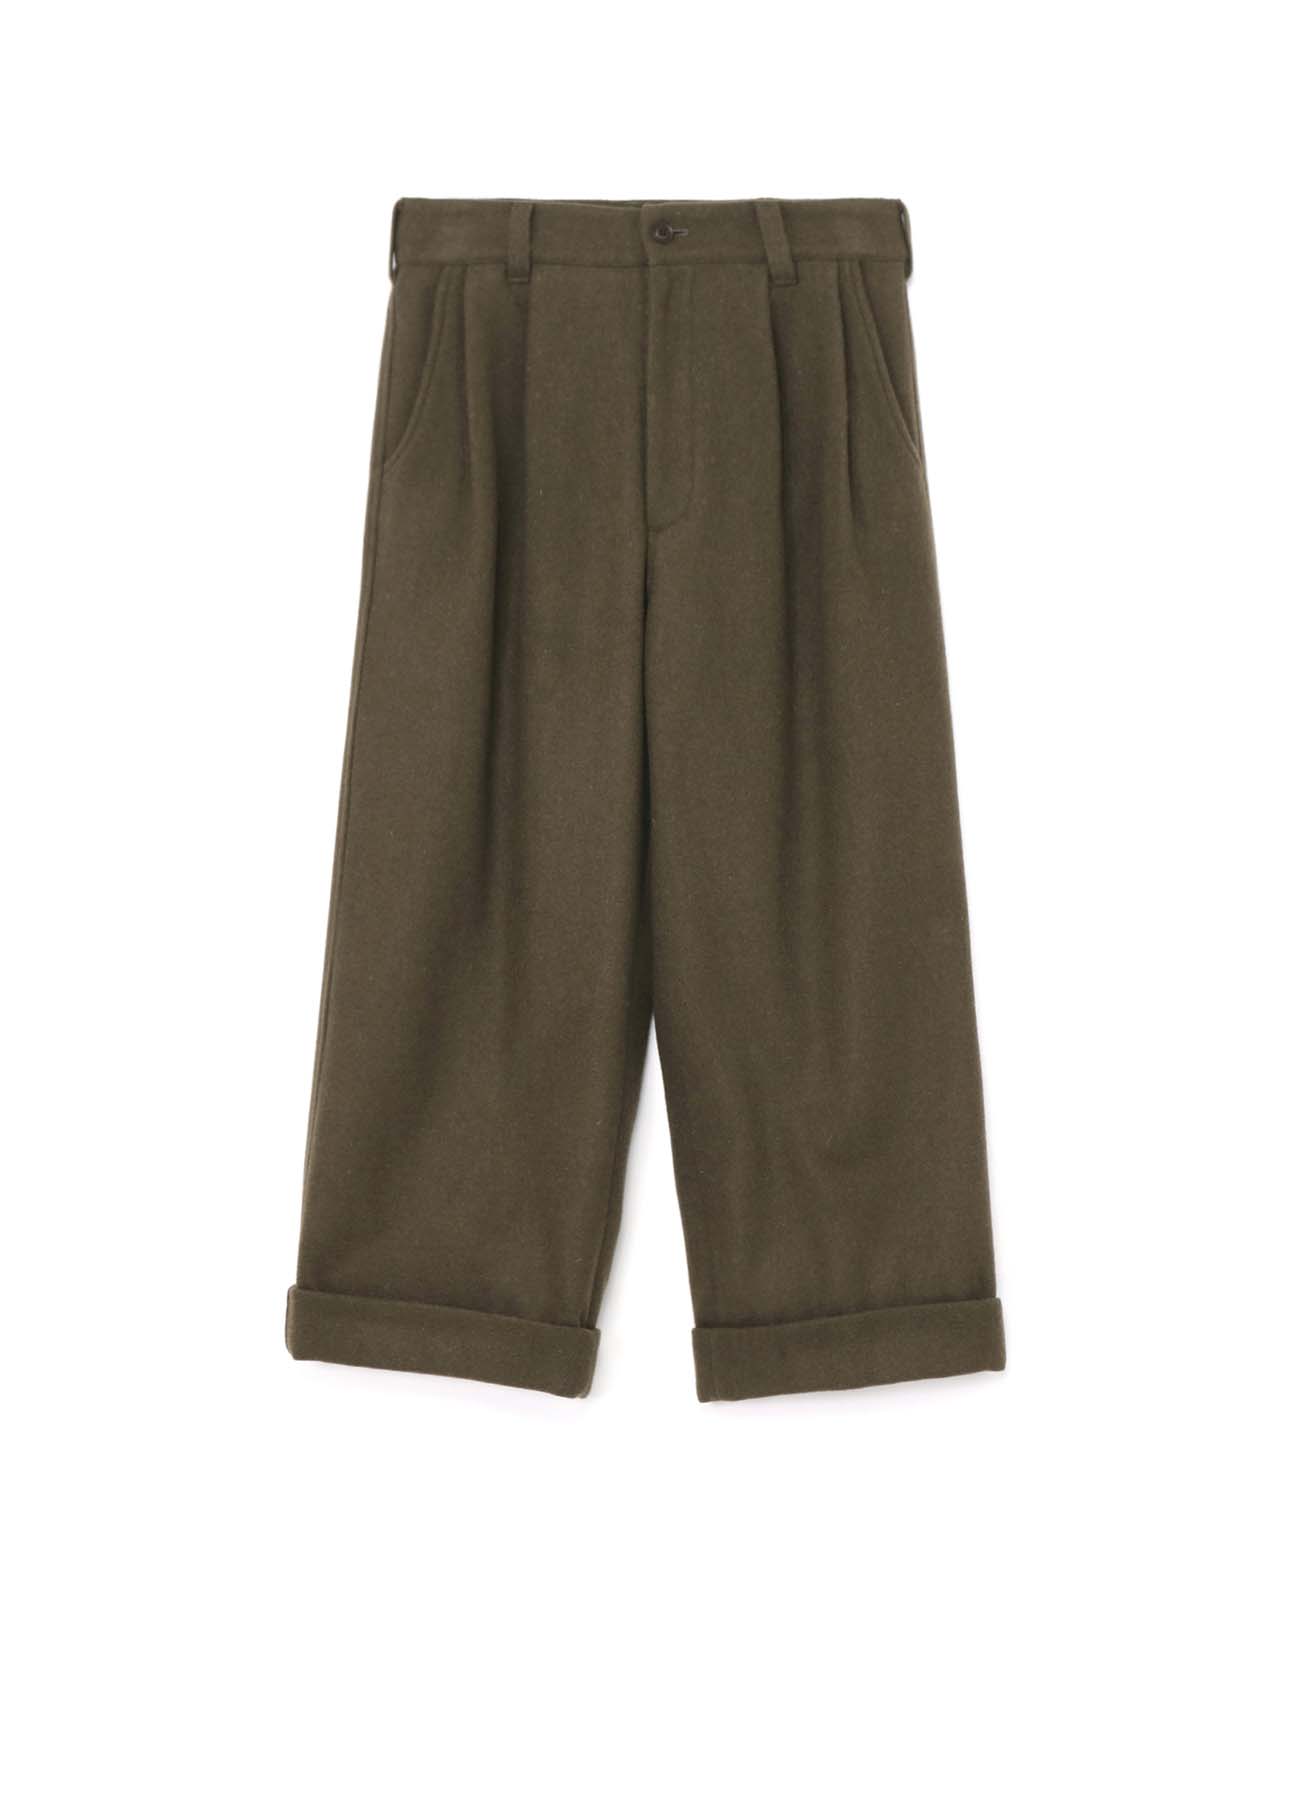 RECYCLED WOOL MELTON 2 TUCK WIDE CUFFED PANTS